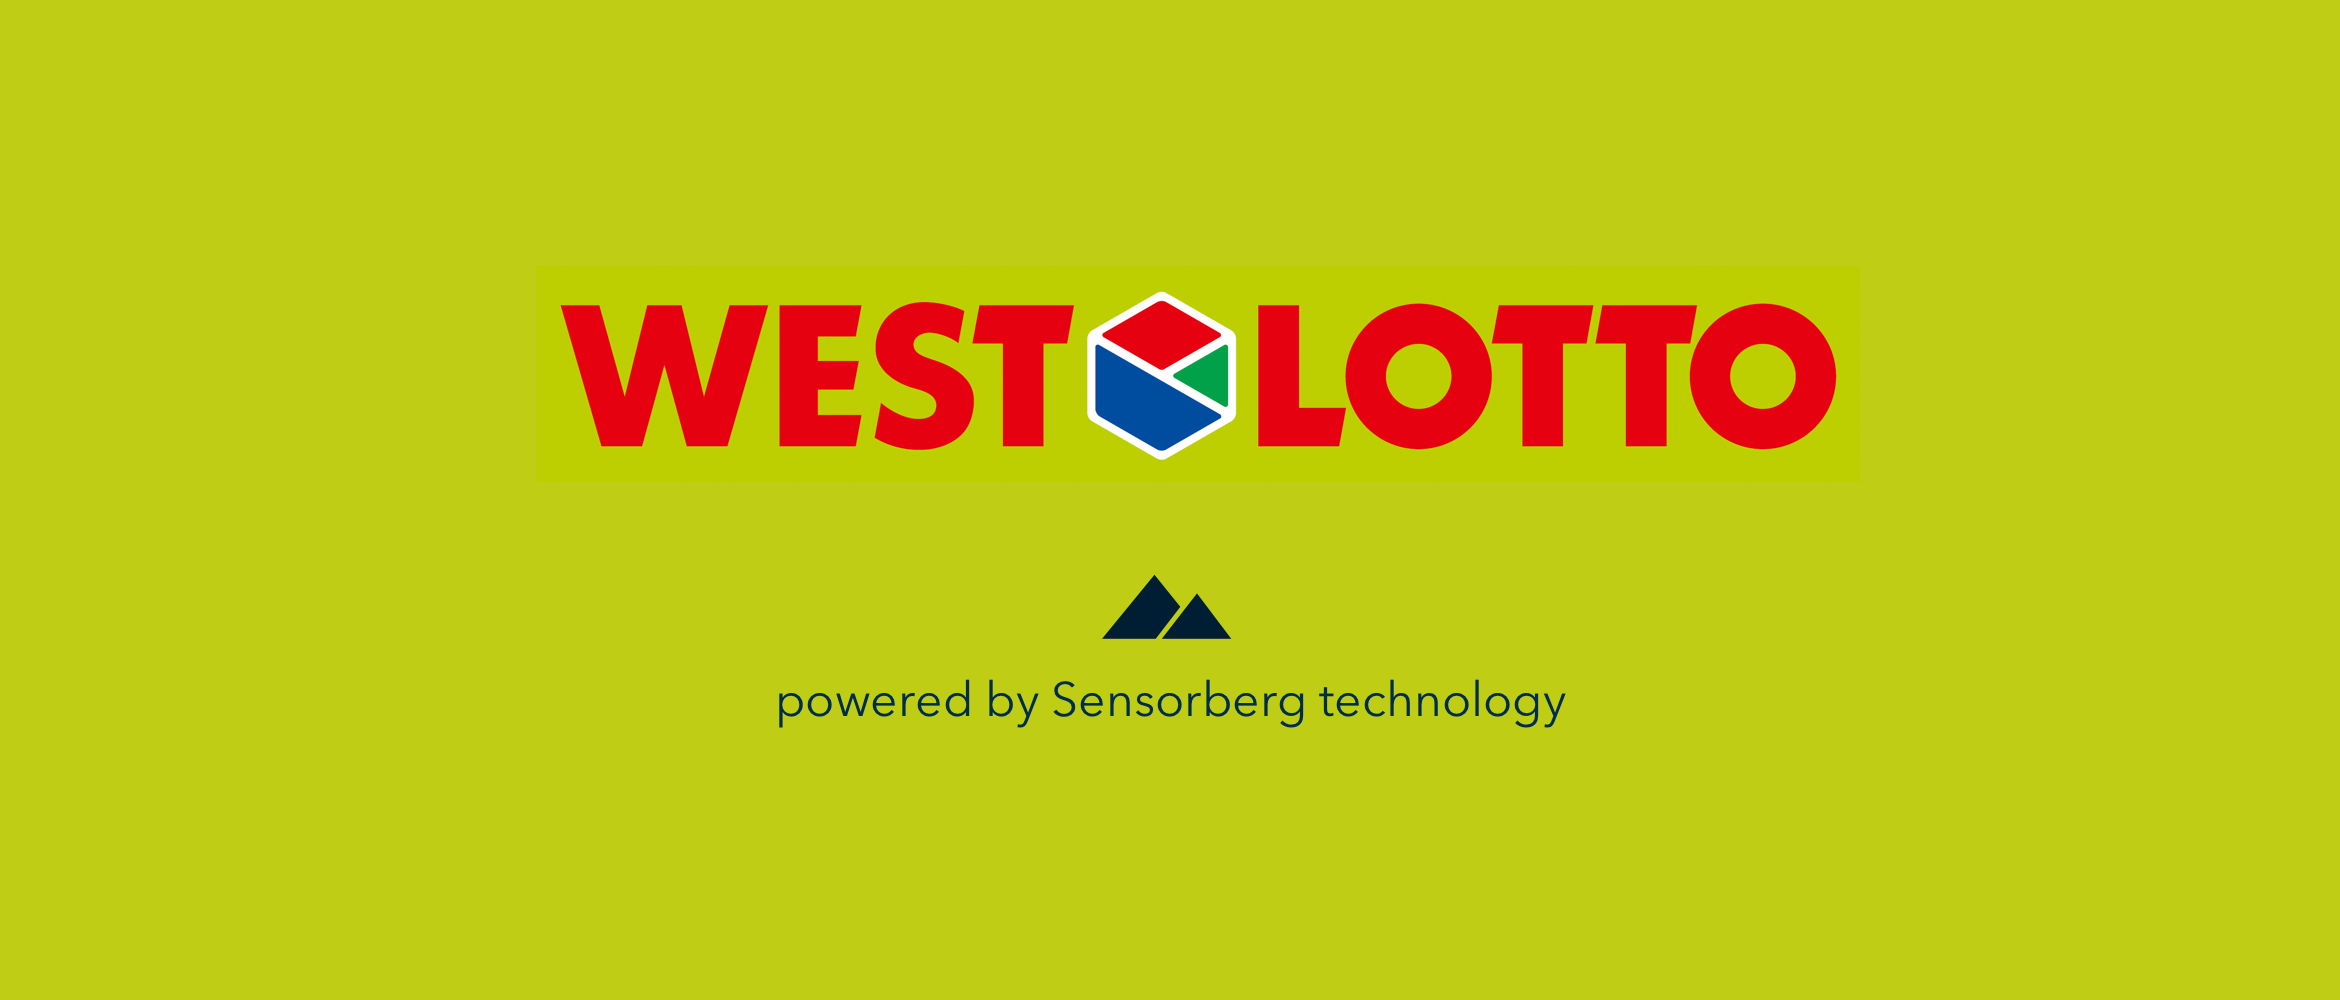 WIN WITH WESTLOTTO AND SENSORBERG!